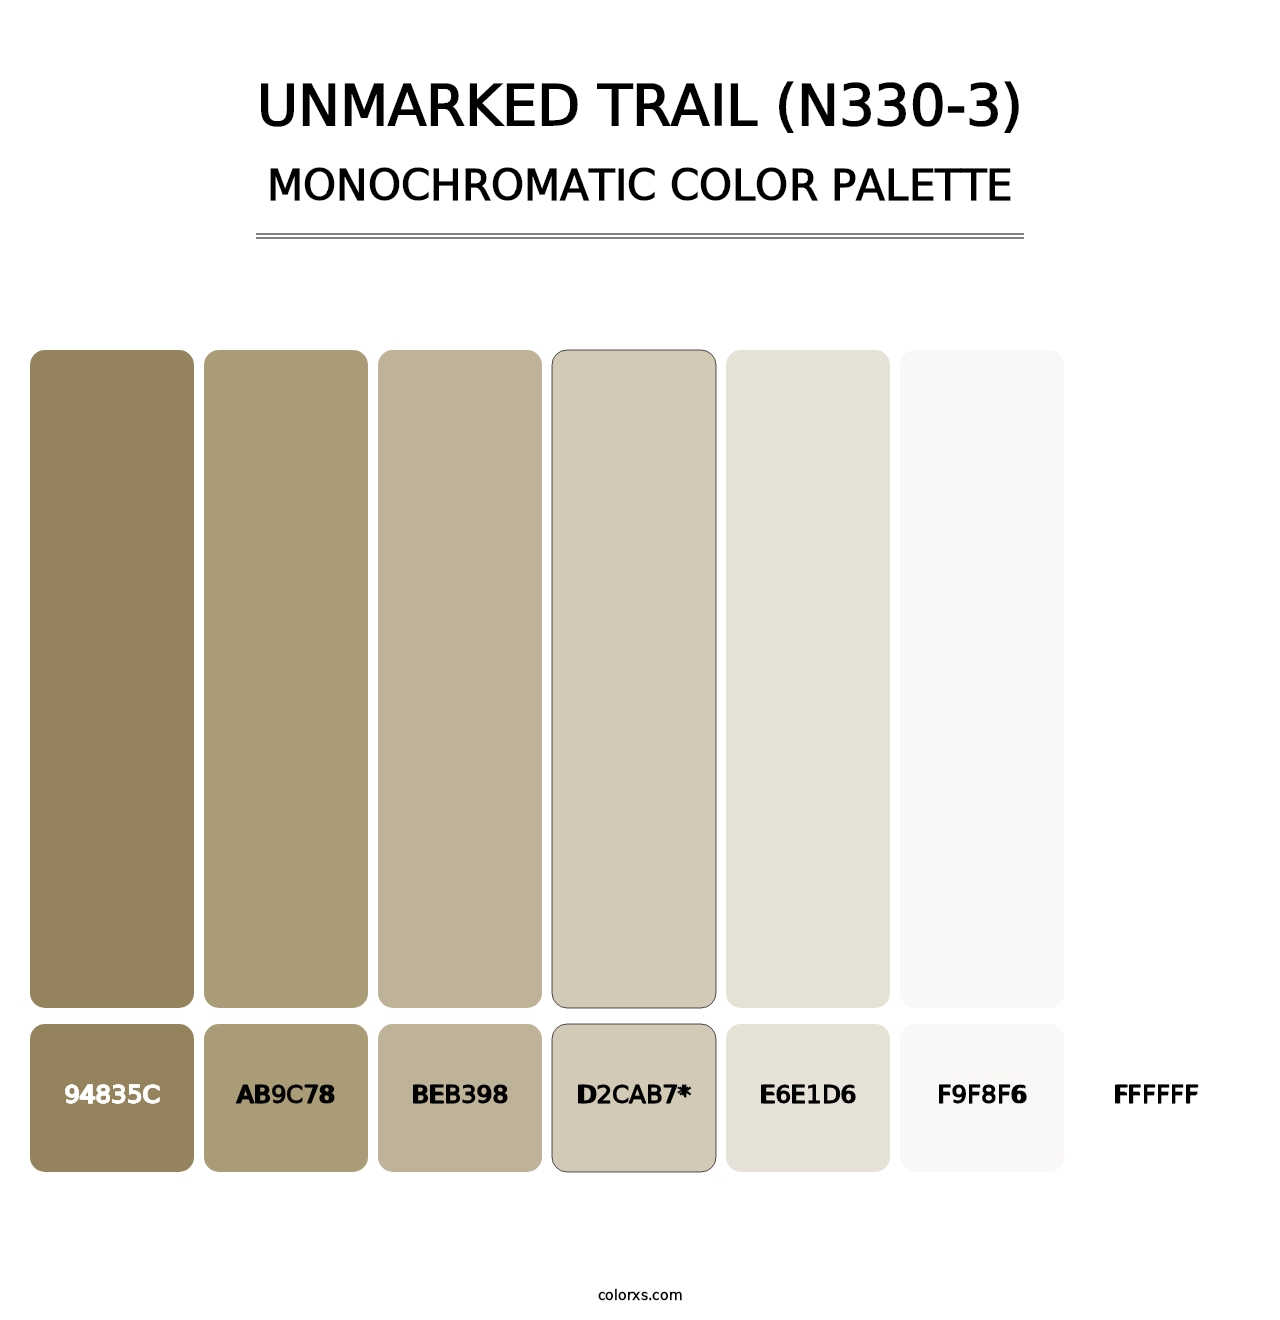 Unmarked Trail (N330-3) - Monochromatic Color Palette